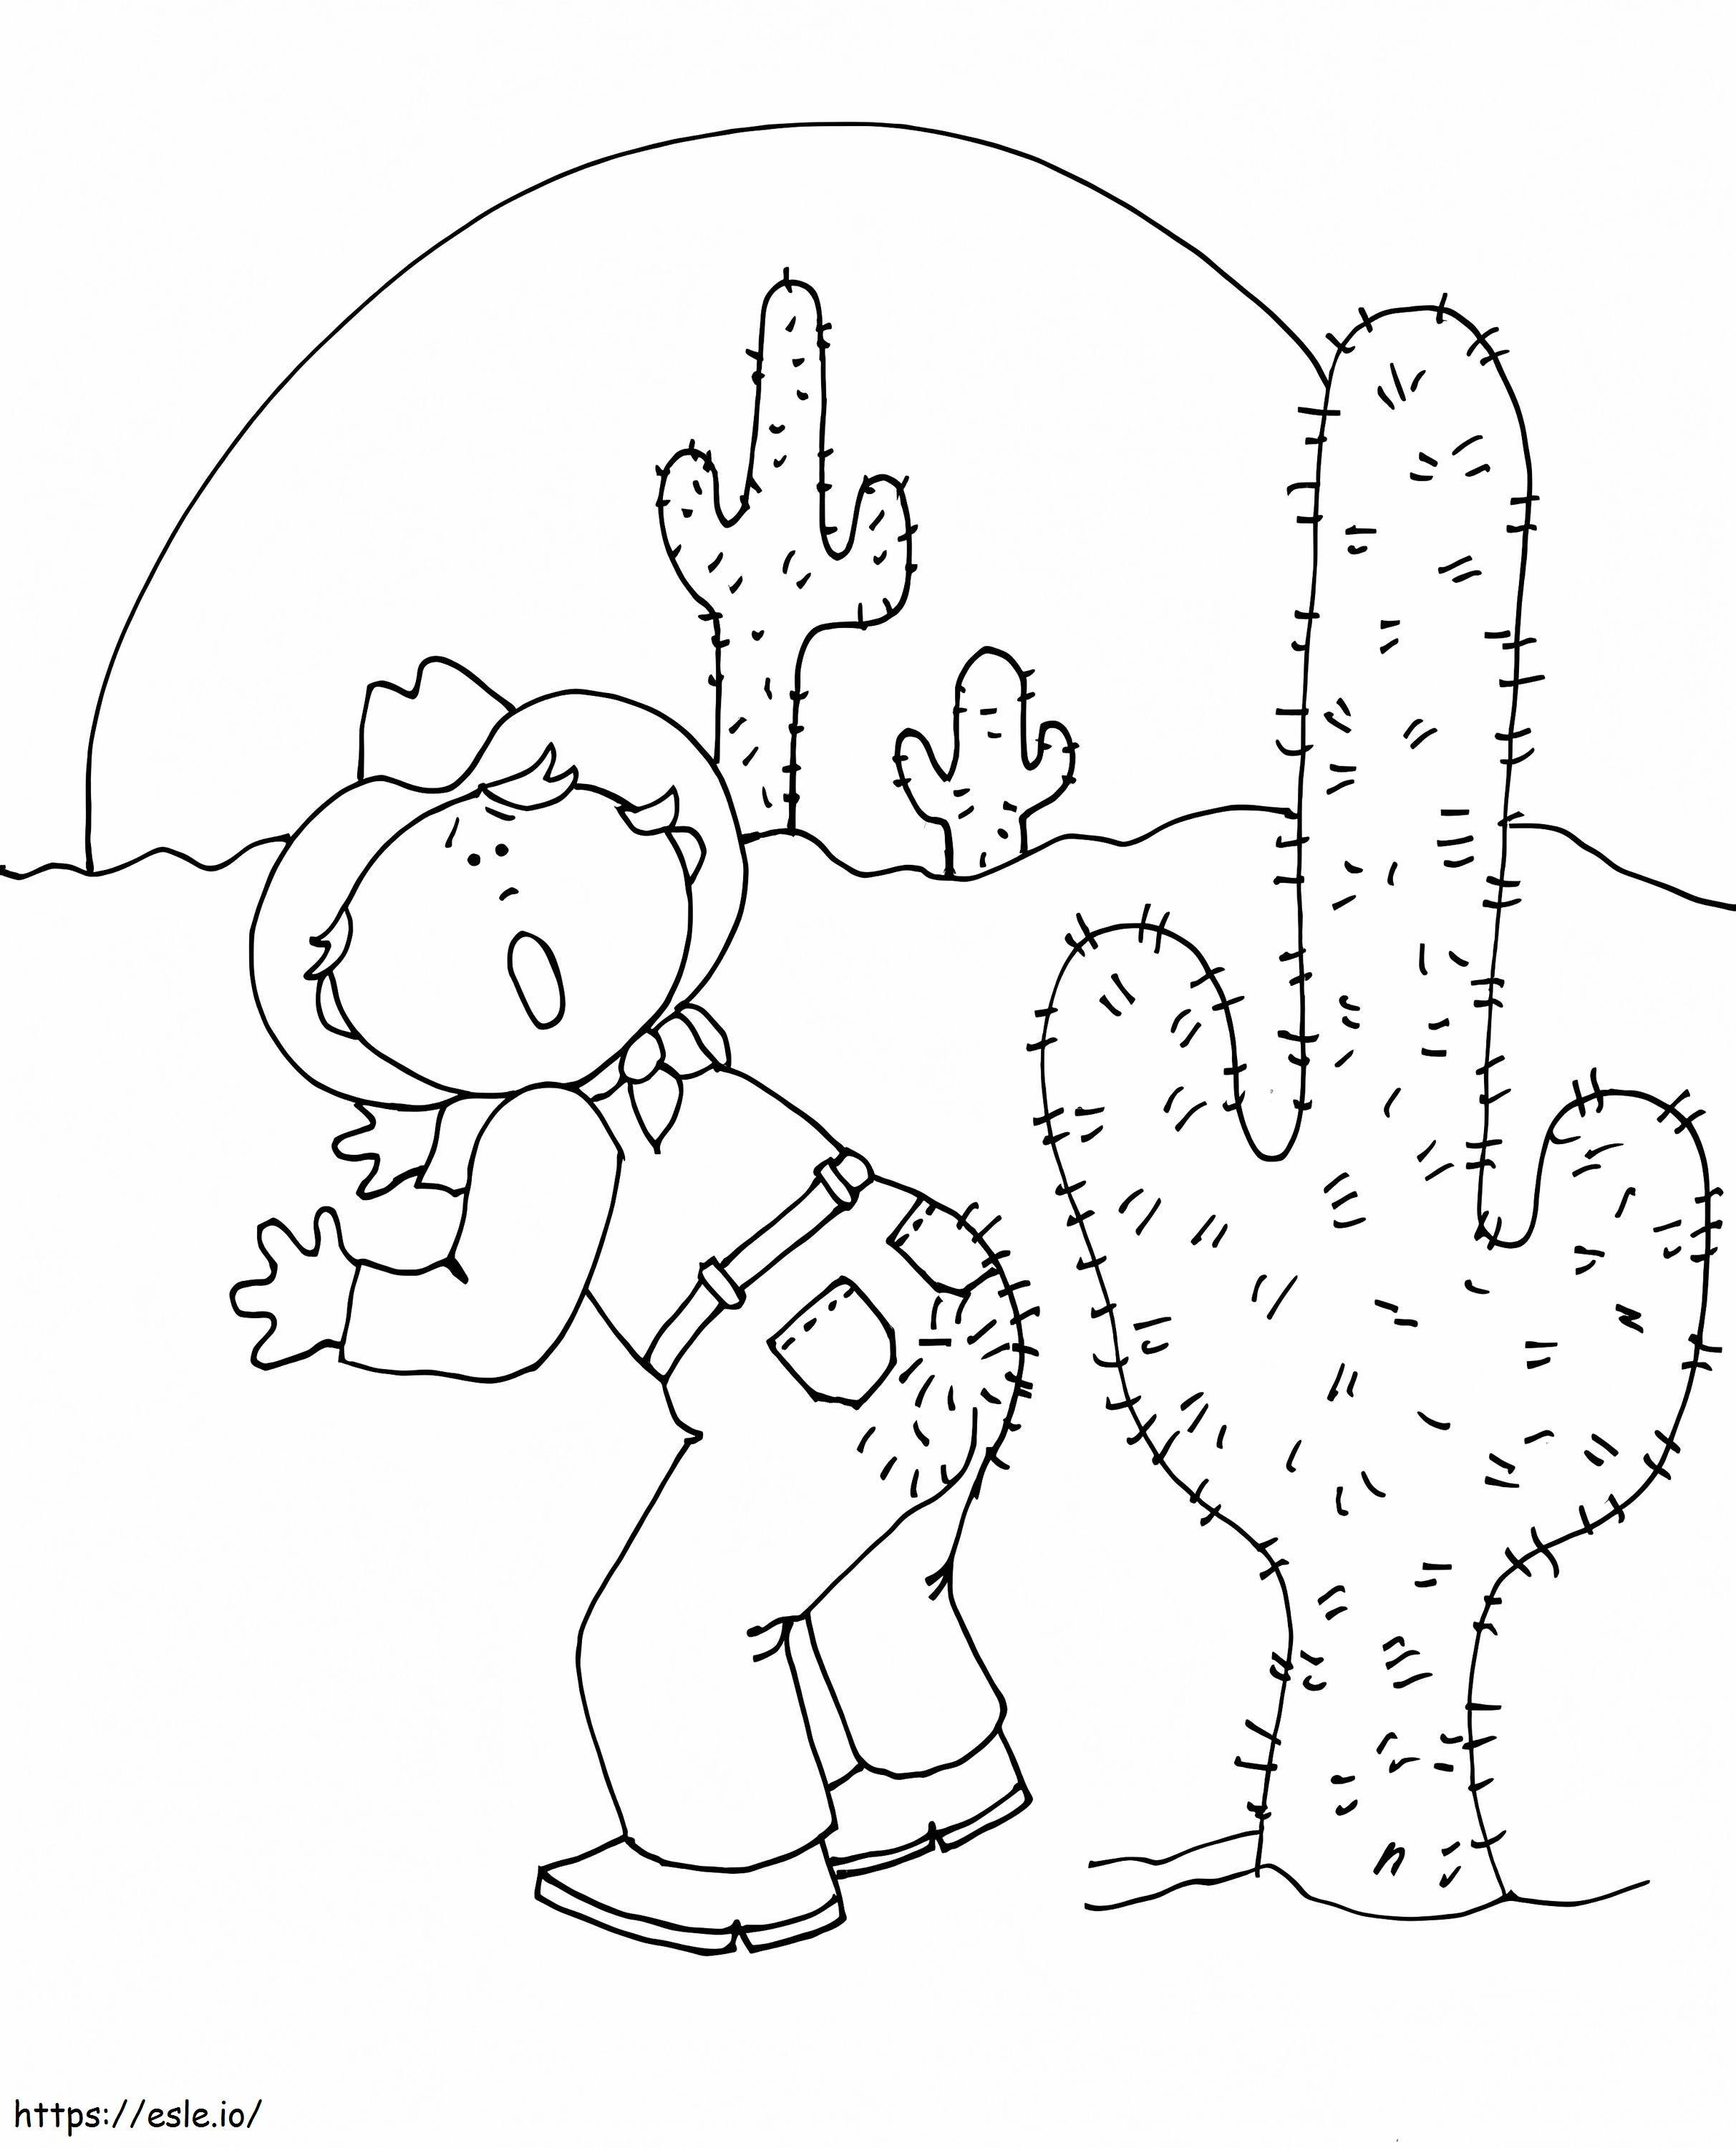 People And Cactus coloring page